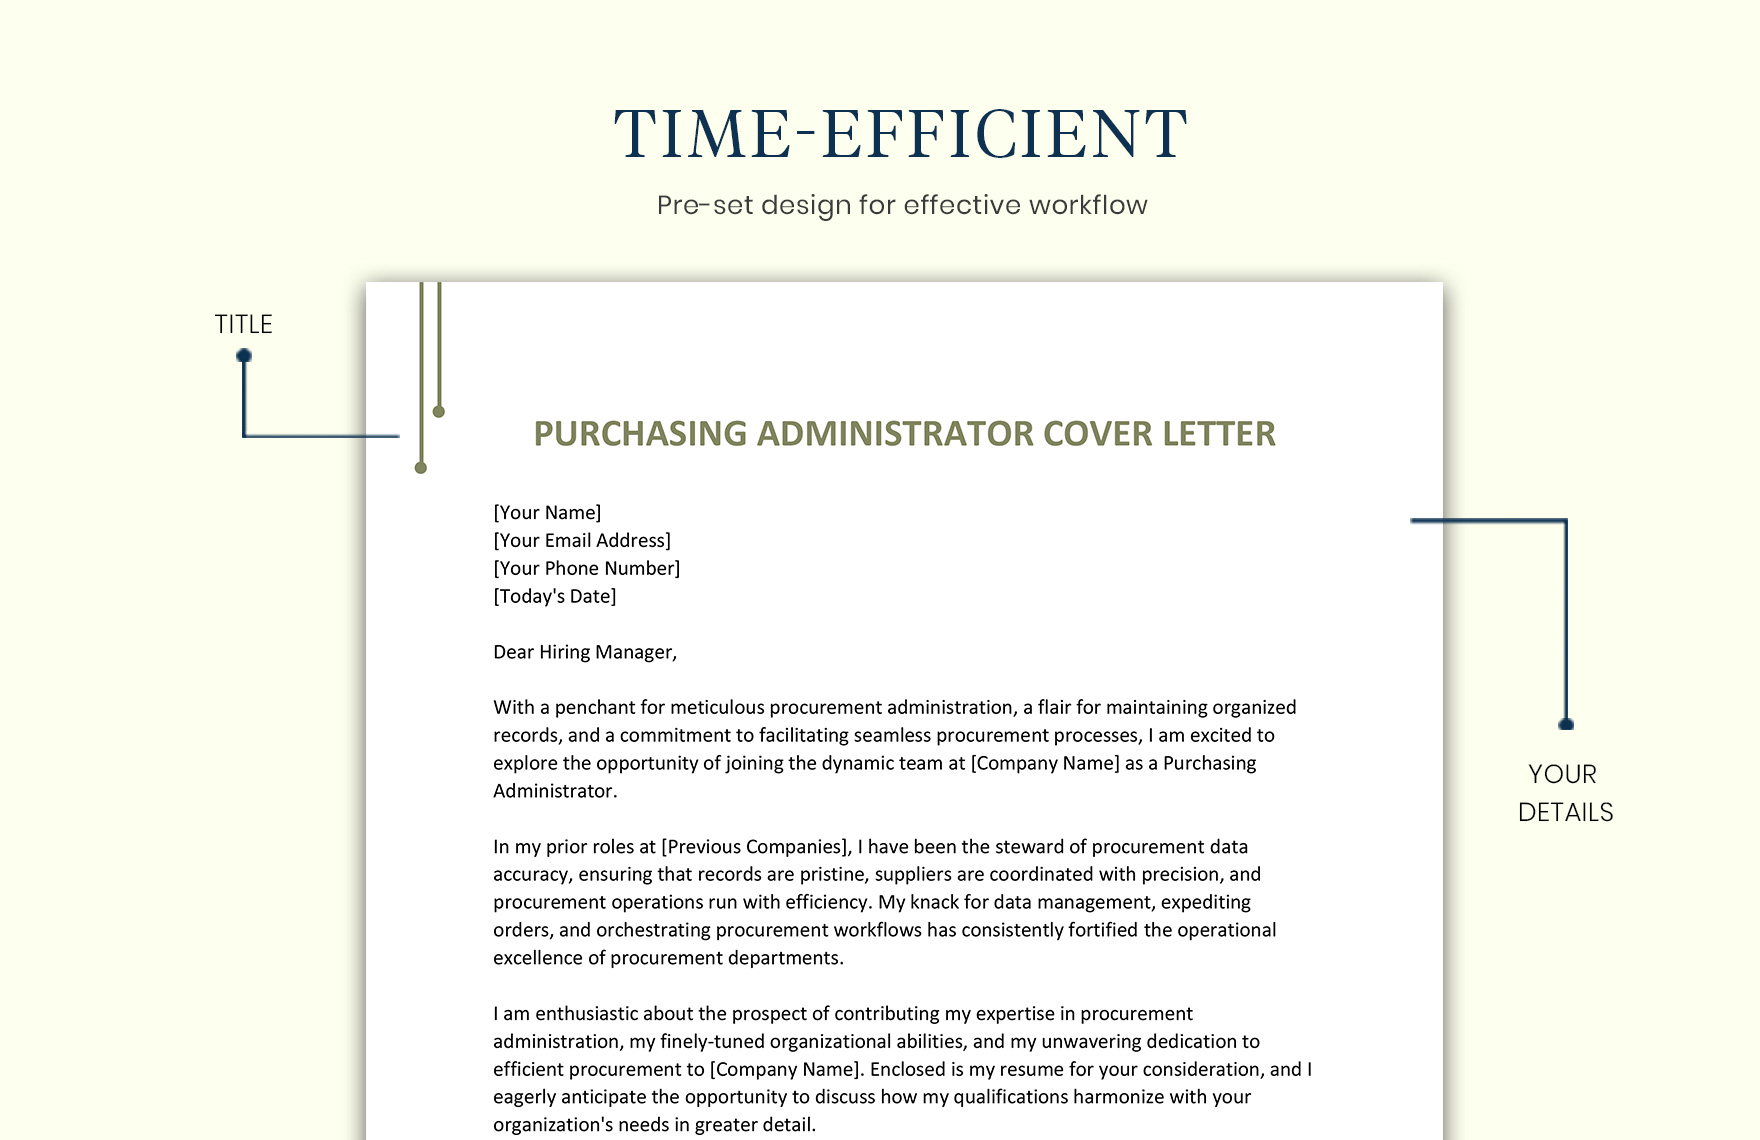 Purchasing Administrator Cover Letter